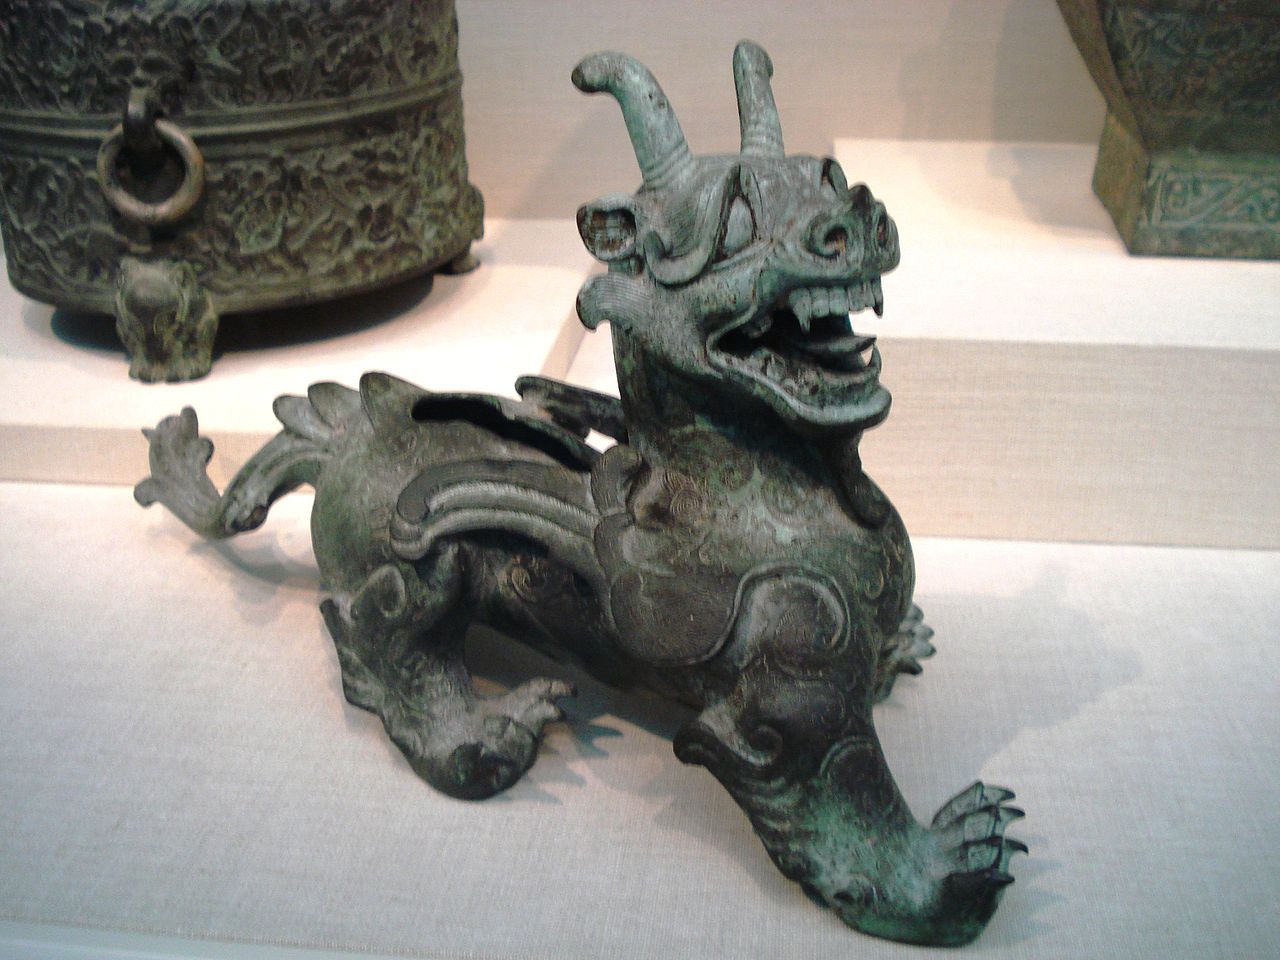 one of the most famous artwork from the Han dynasty time